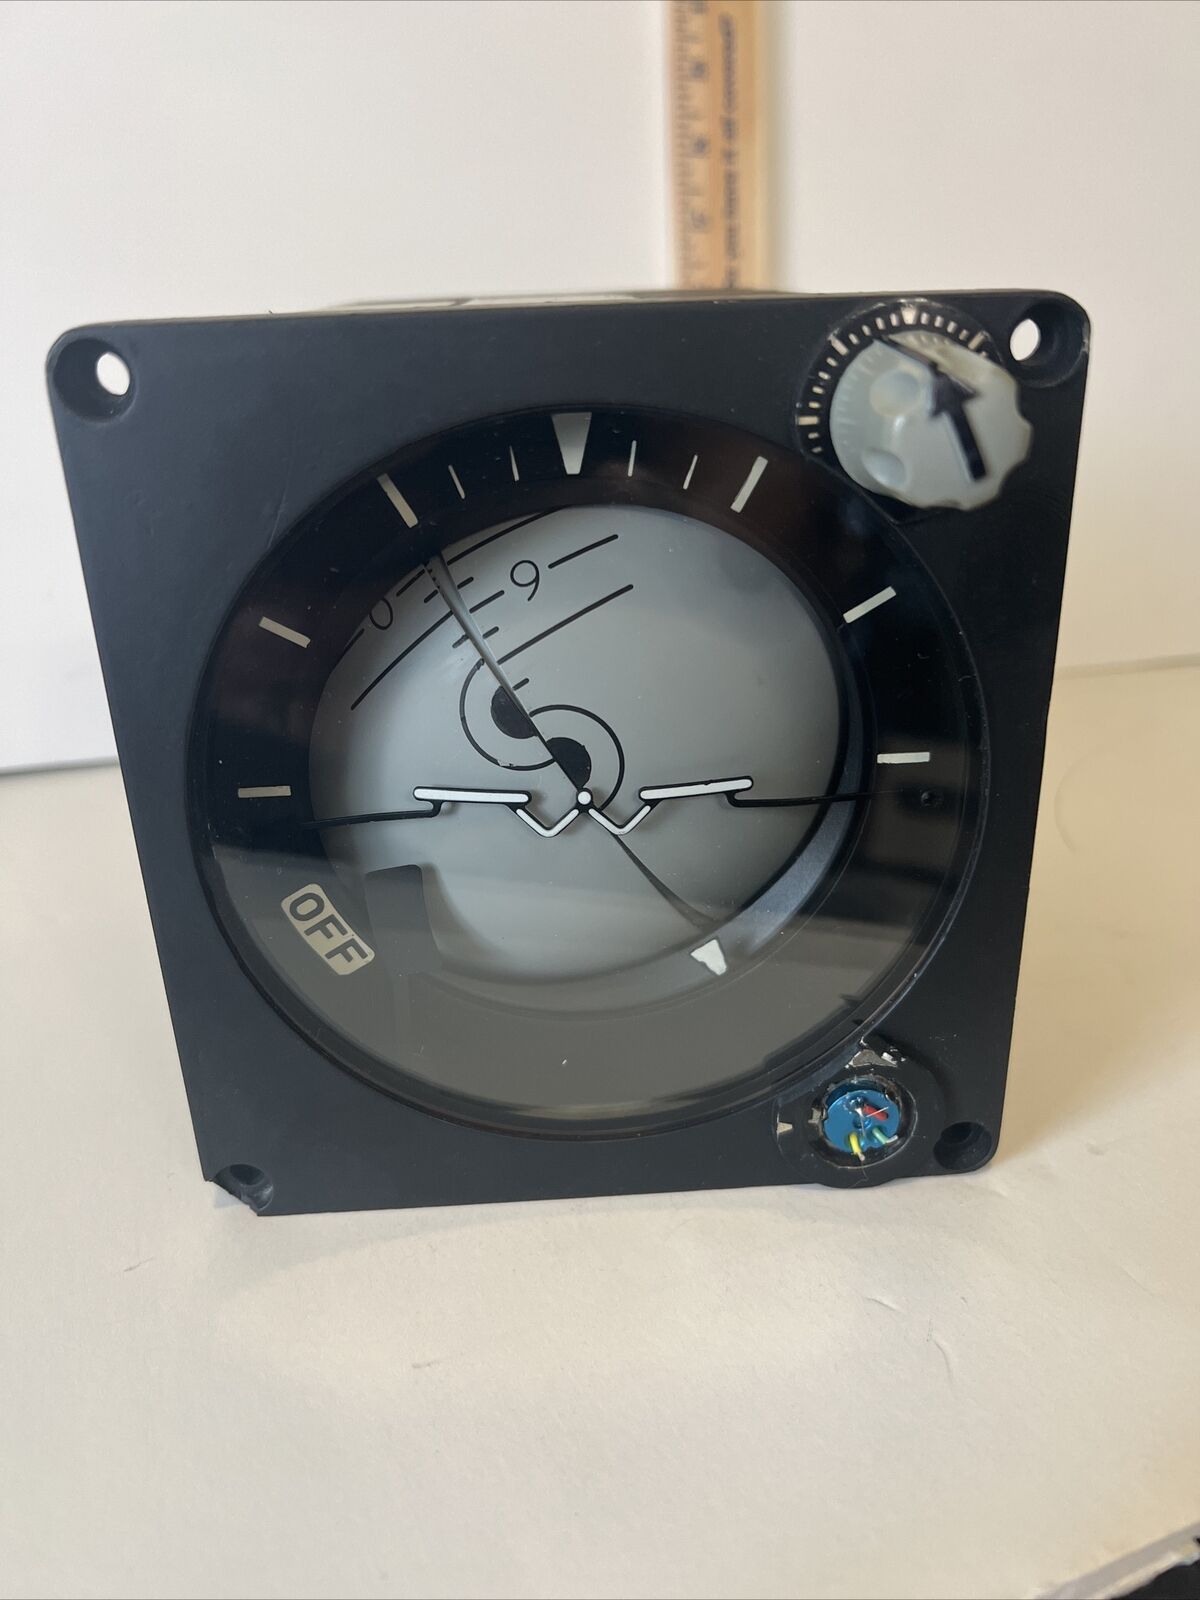 Bell UH-1 Huey - IND-A5-UH1 - 4145 A - Remote Attitude Indicator 148700-01-01 OH